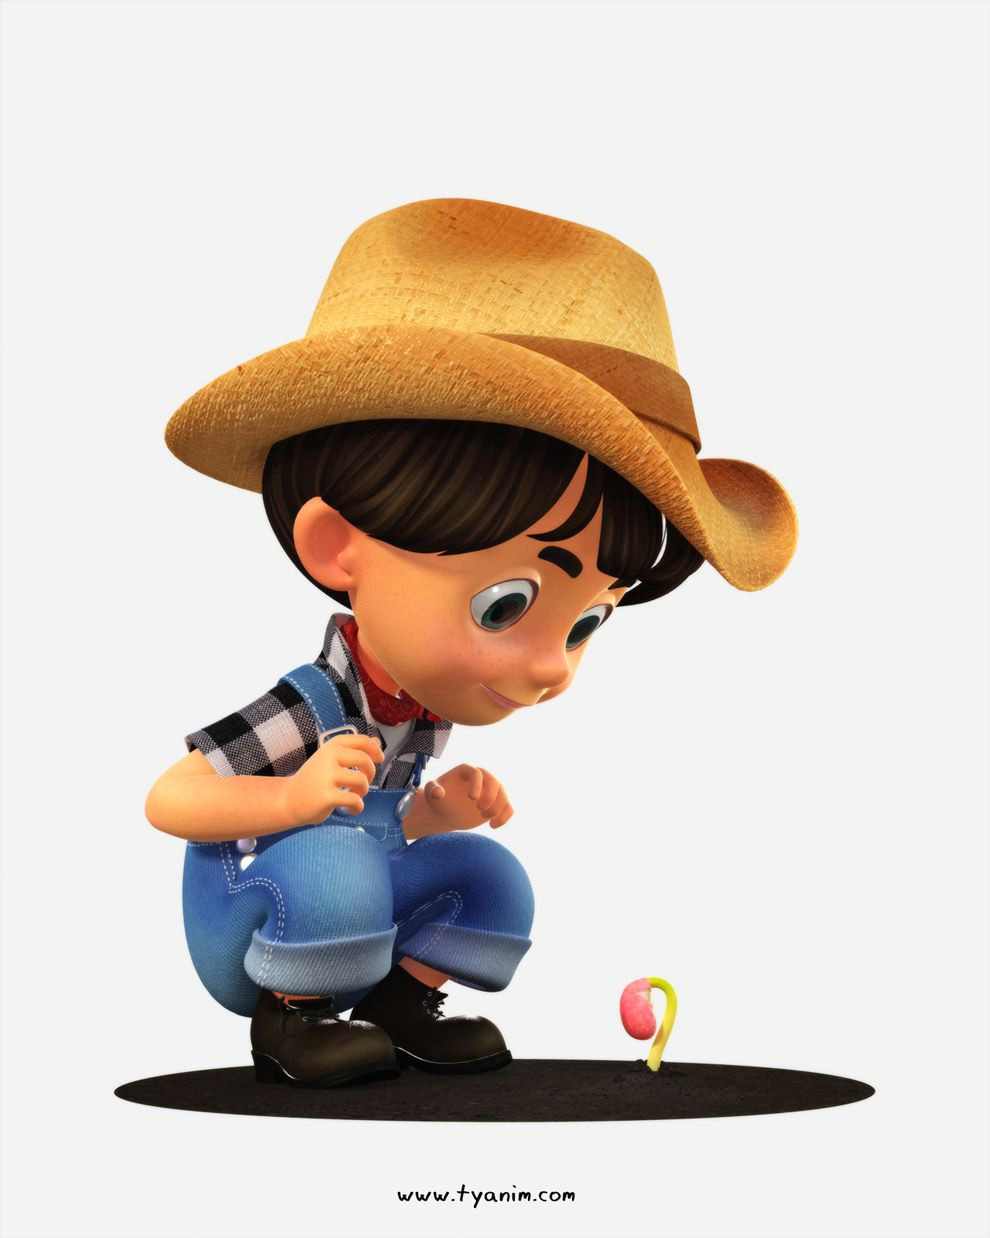 check this 3d kid farmer character more